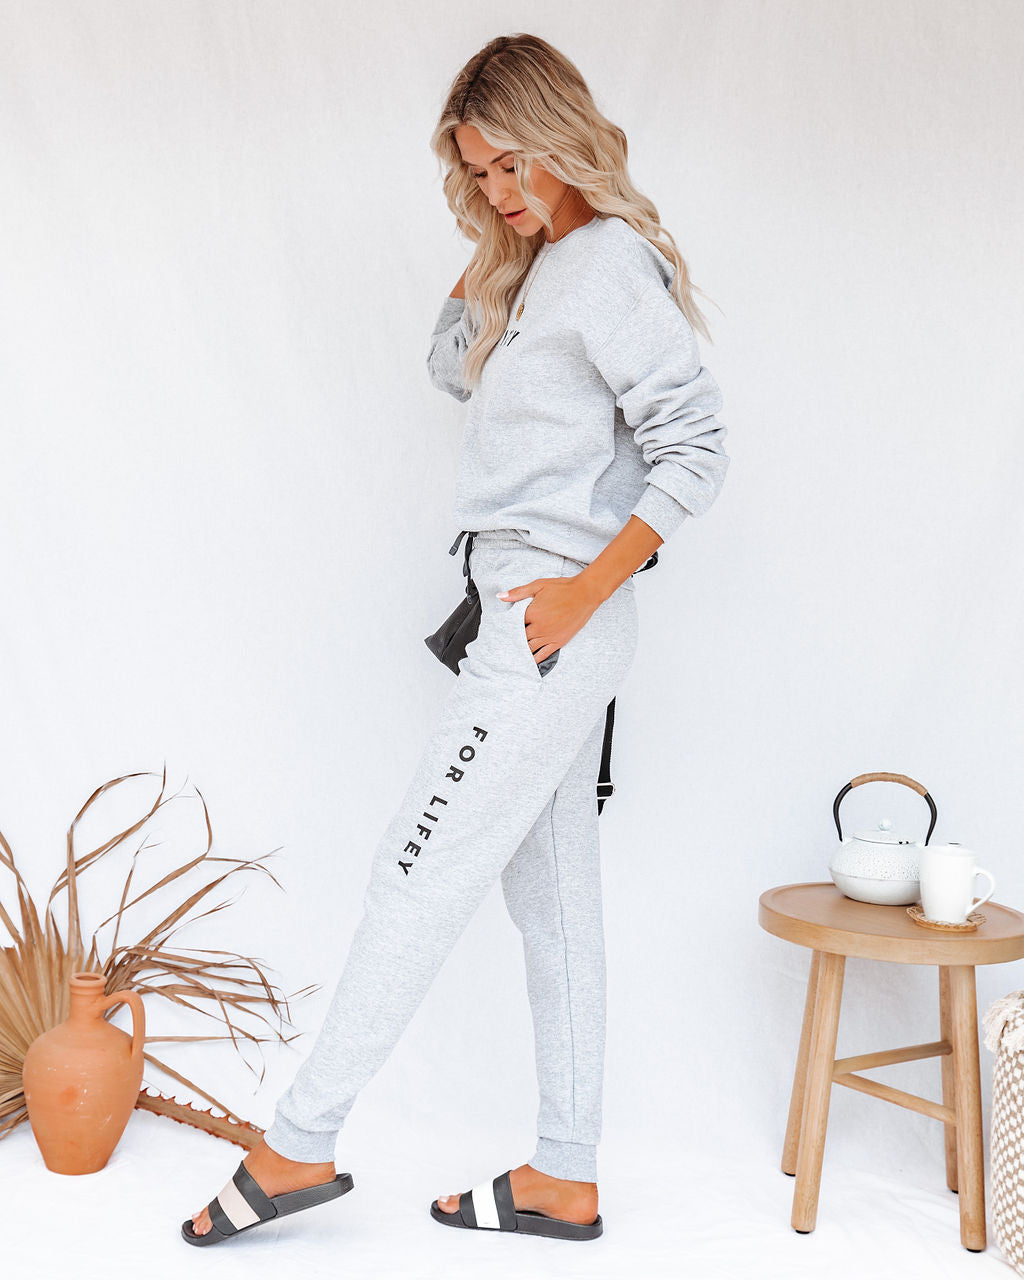 A Wifey For Lifey Cotton Blend Pocketed Joggers